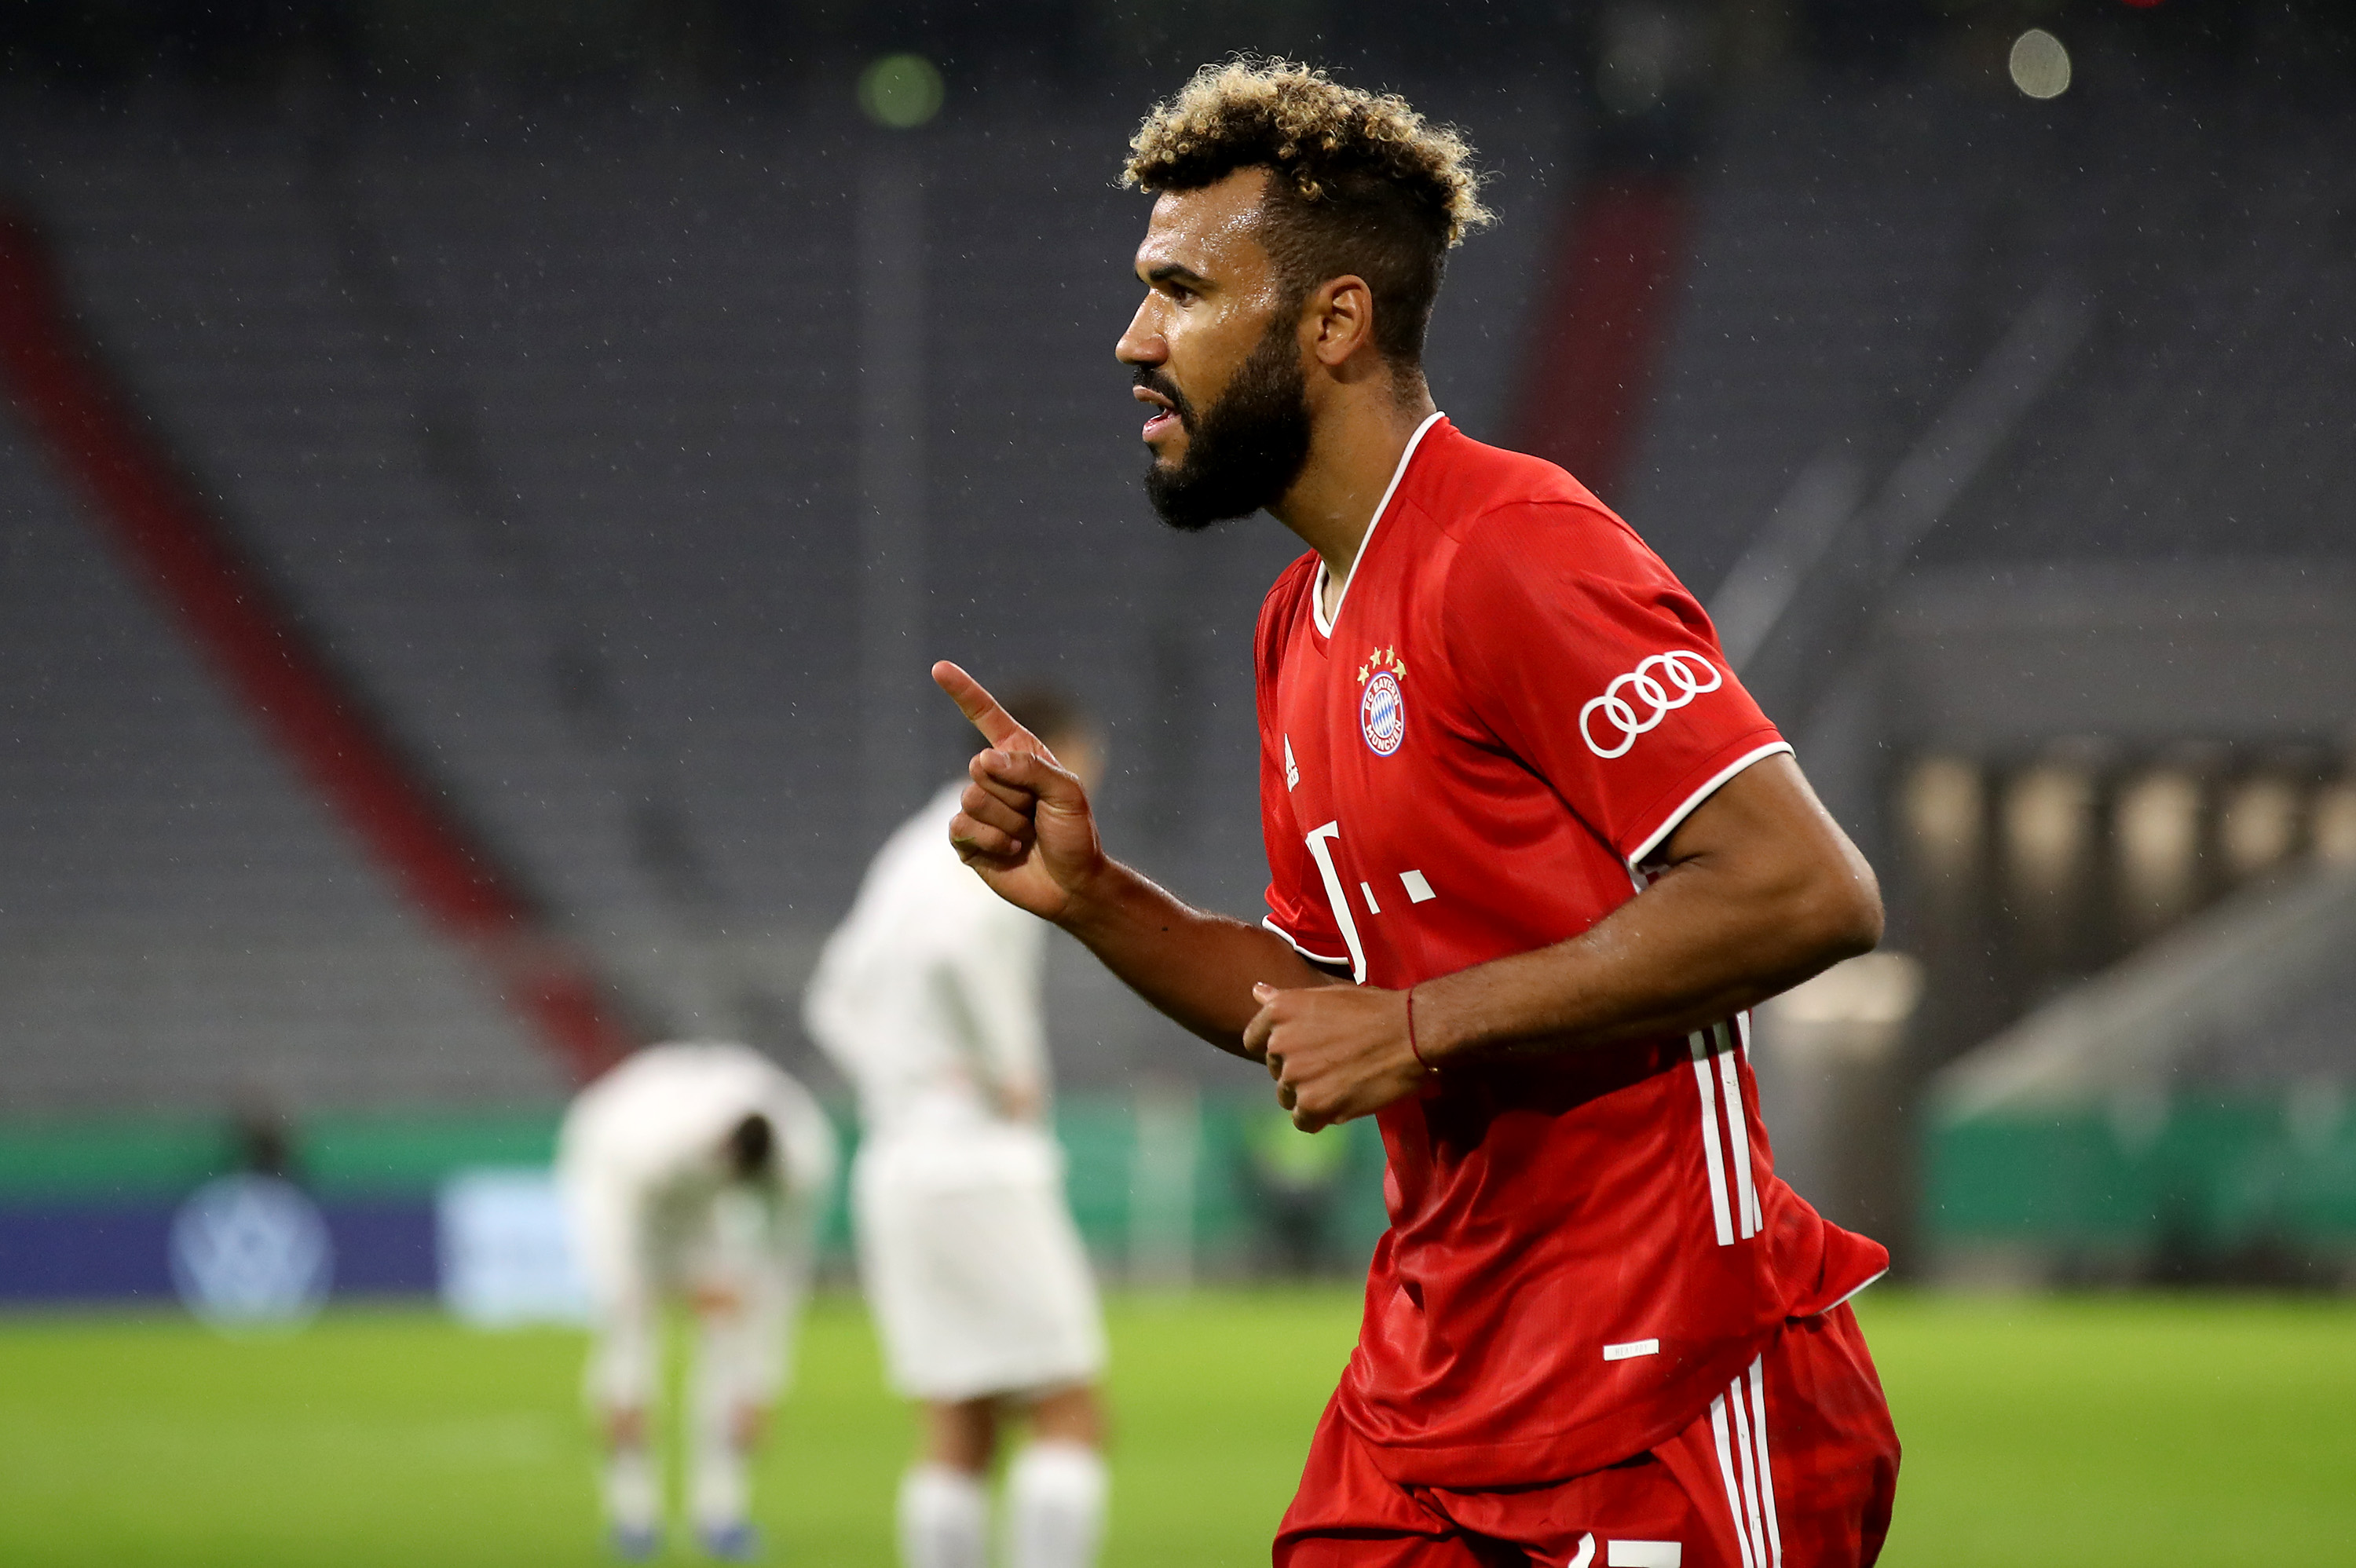 Eric Maxim Choupo-Moting signs two year extension with Bayern Munich until 2023